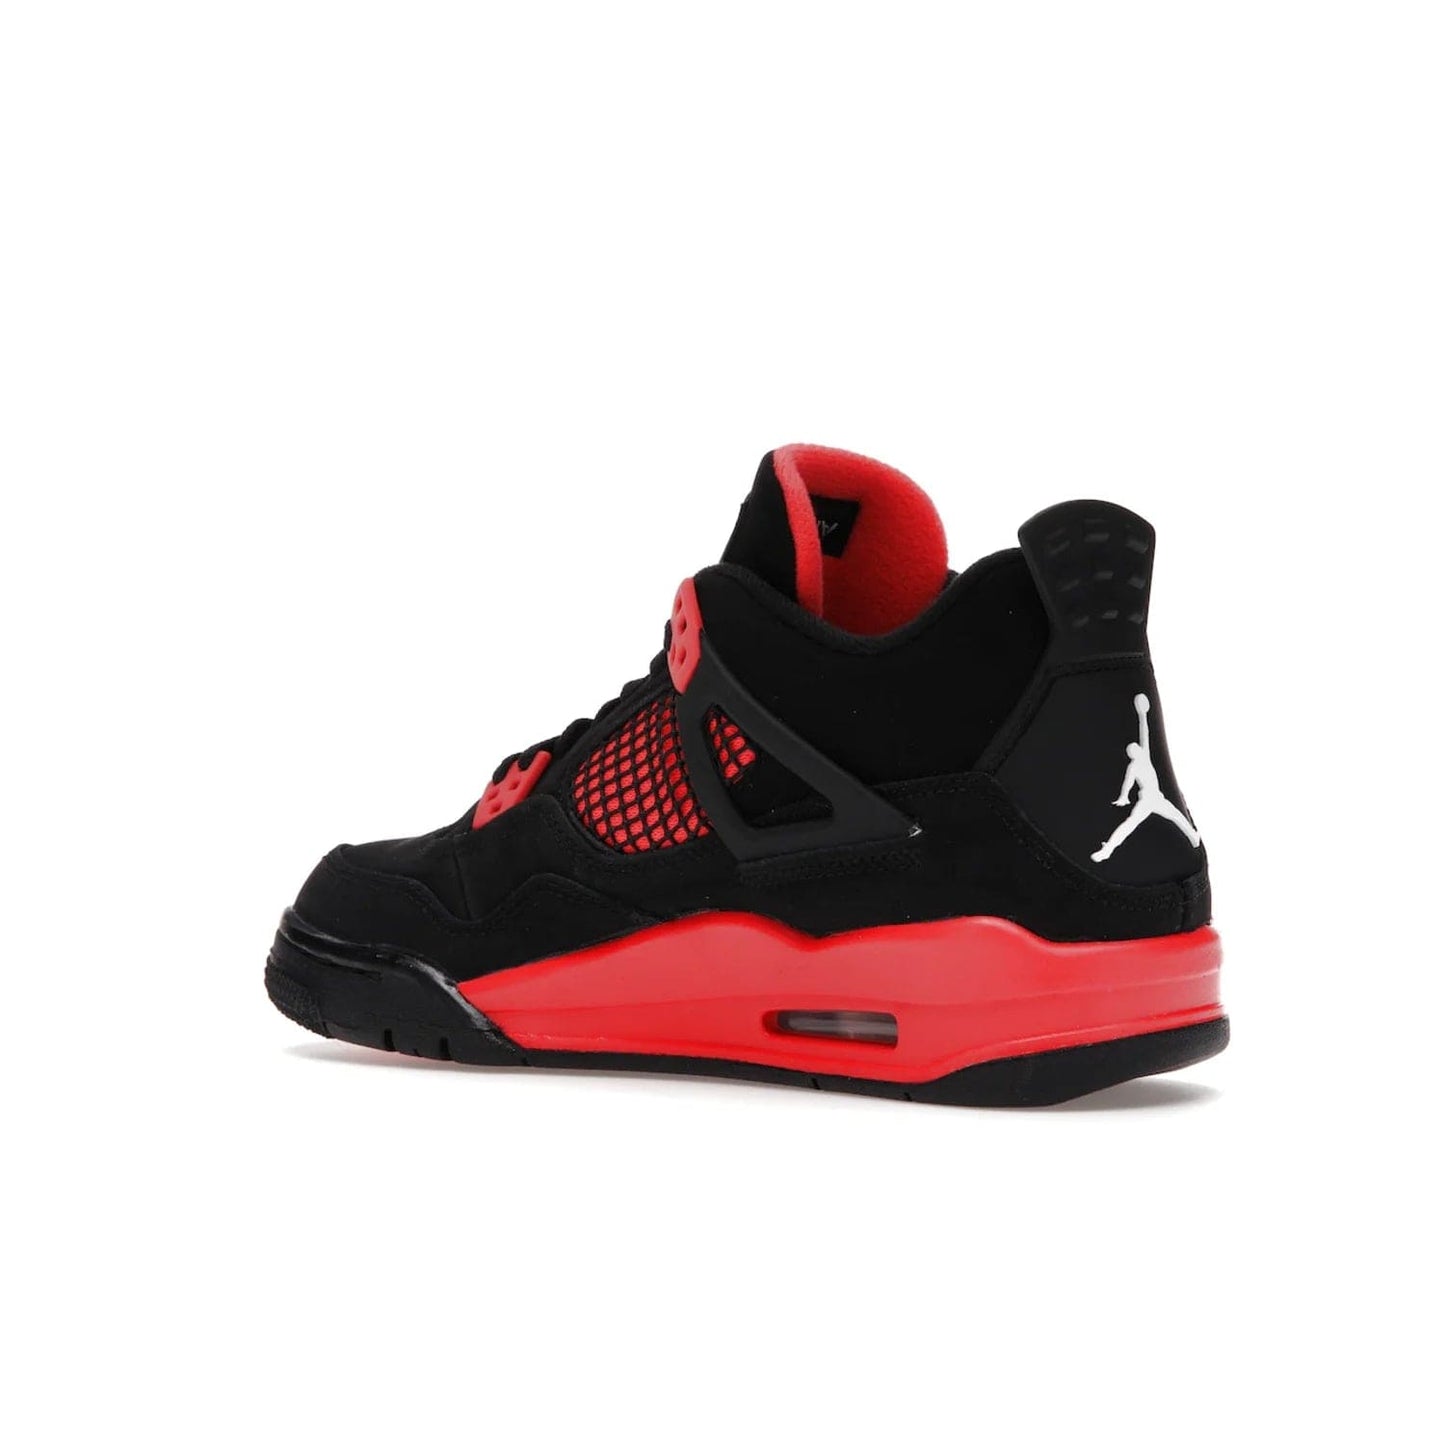 Jordan 4 Retro Red Thunder (GS) - Image 23 - Only at www.BallersClubKickz.com - The Air Jordan 4 Retro Red Thunder GS features a stylish black and crimson upper with a Jumpman logo. Athletic midsole with Air bubbles for cushioning and black rubber outsole with iconic motif complete this classic sneaker.